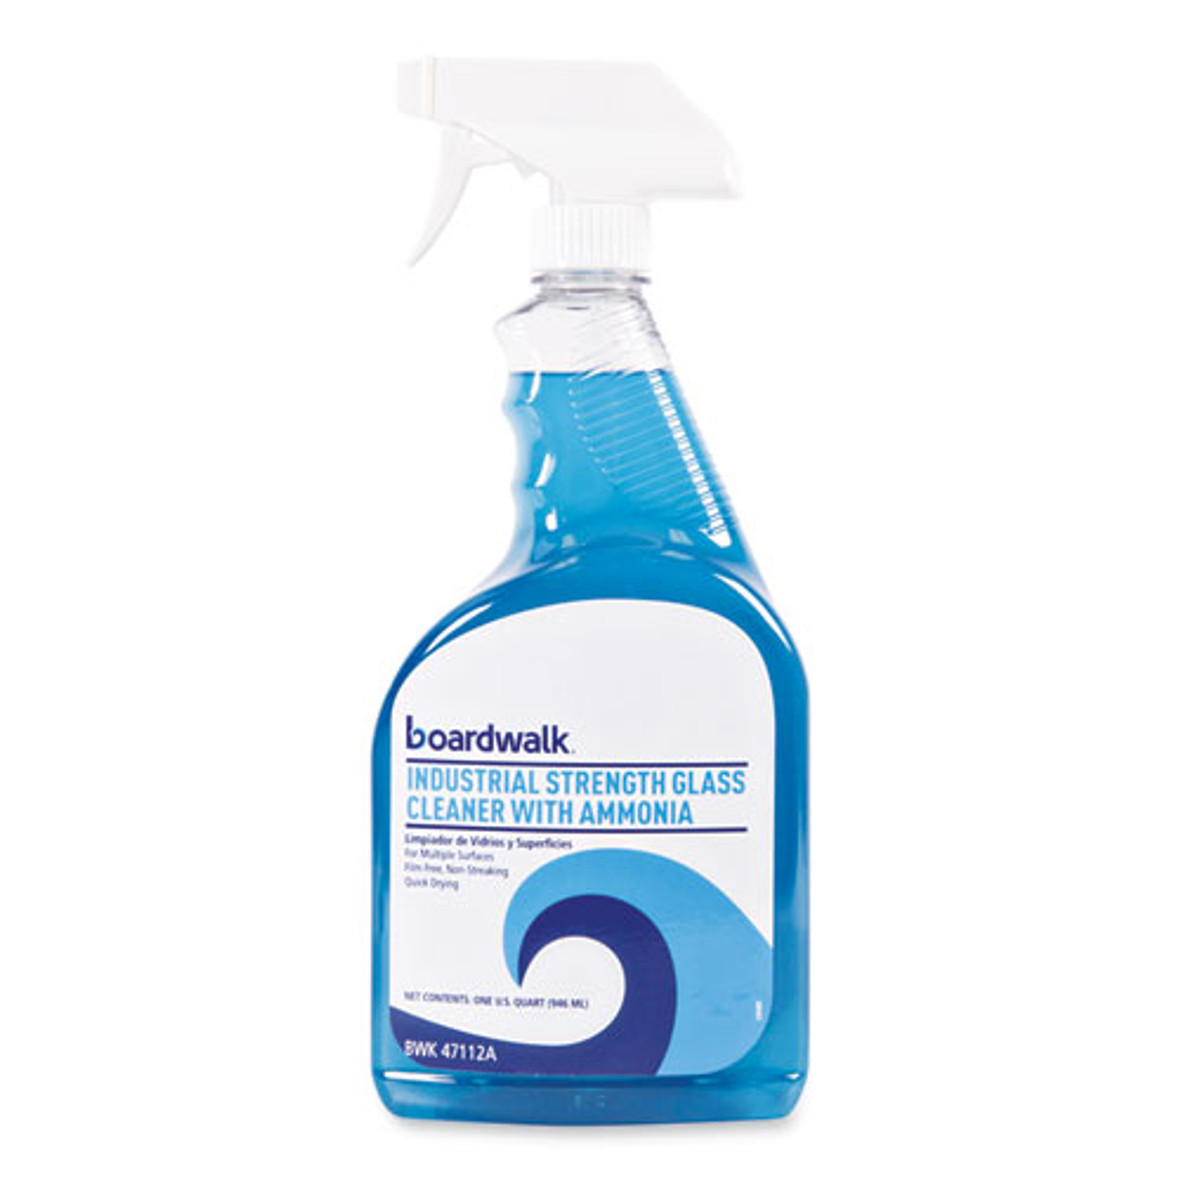 Boardwalk® Industrial Strength Glass Cleaner with Ammonia